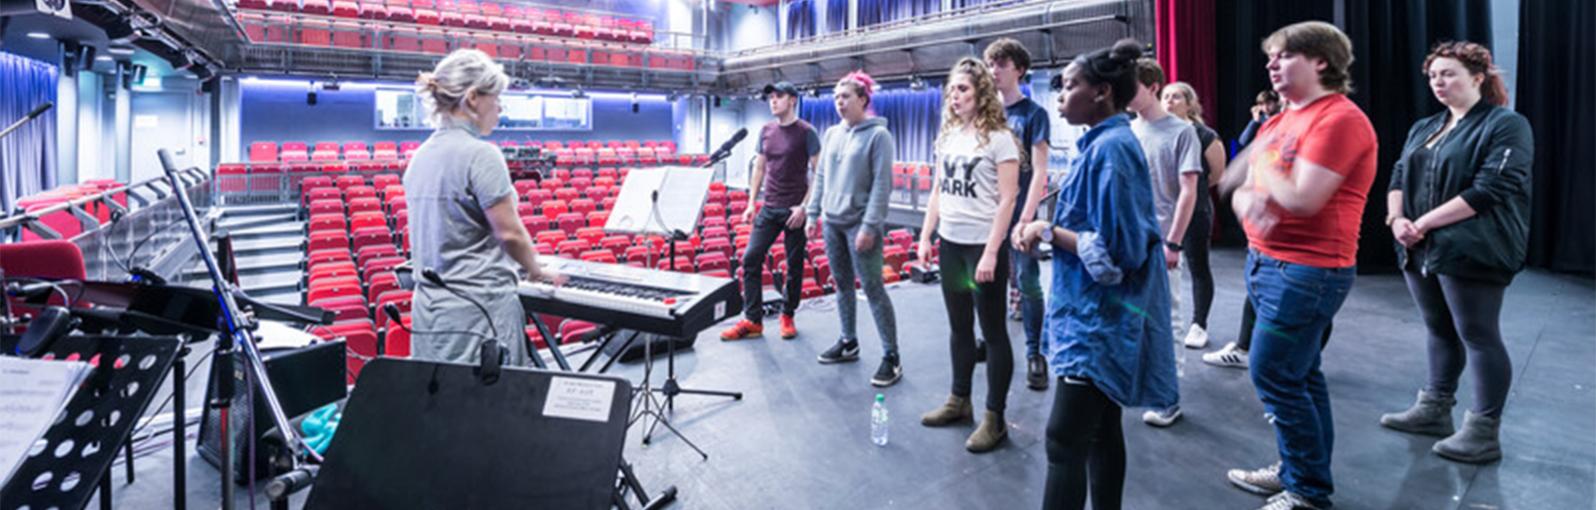 Students rehearsing in theatre